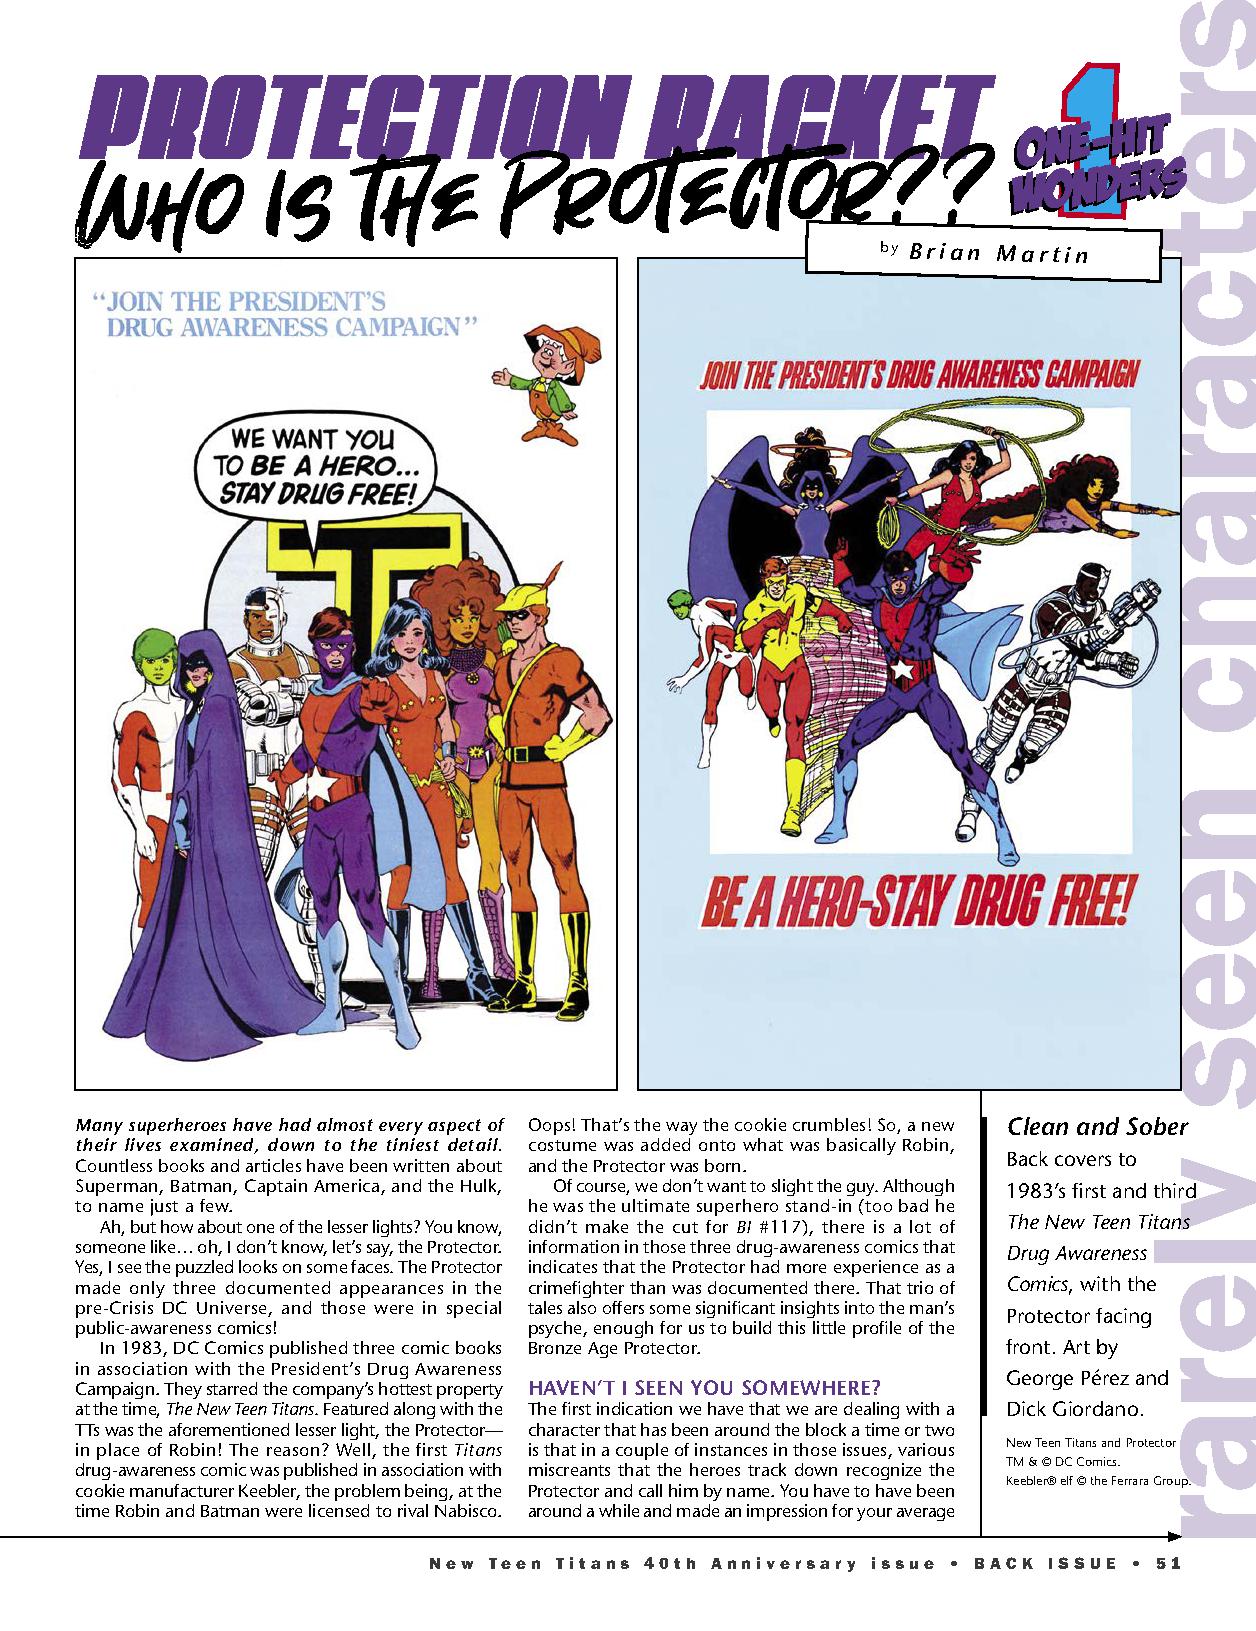 Read online Back Issue comic -  Issue #122 - 53